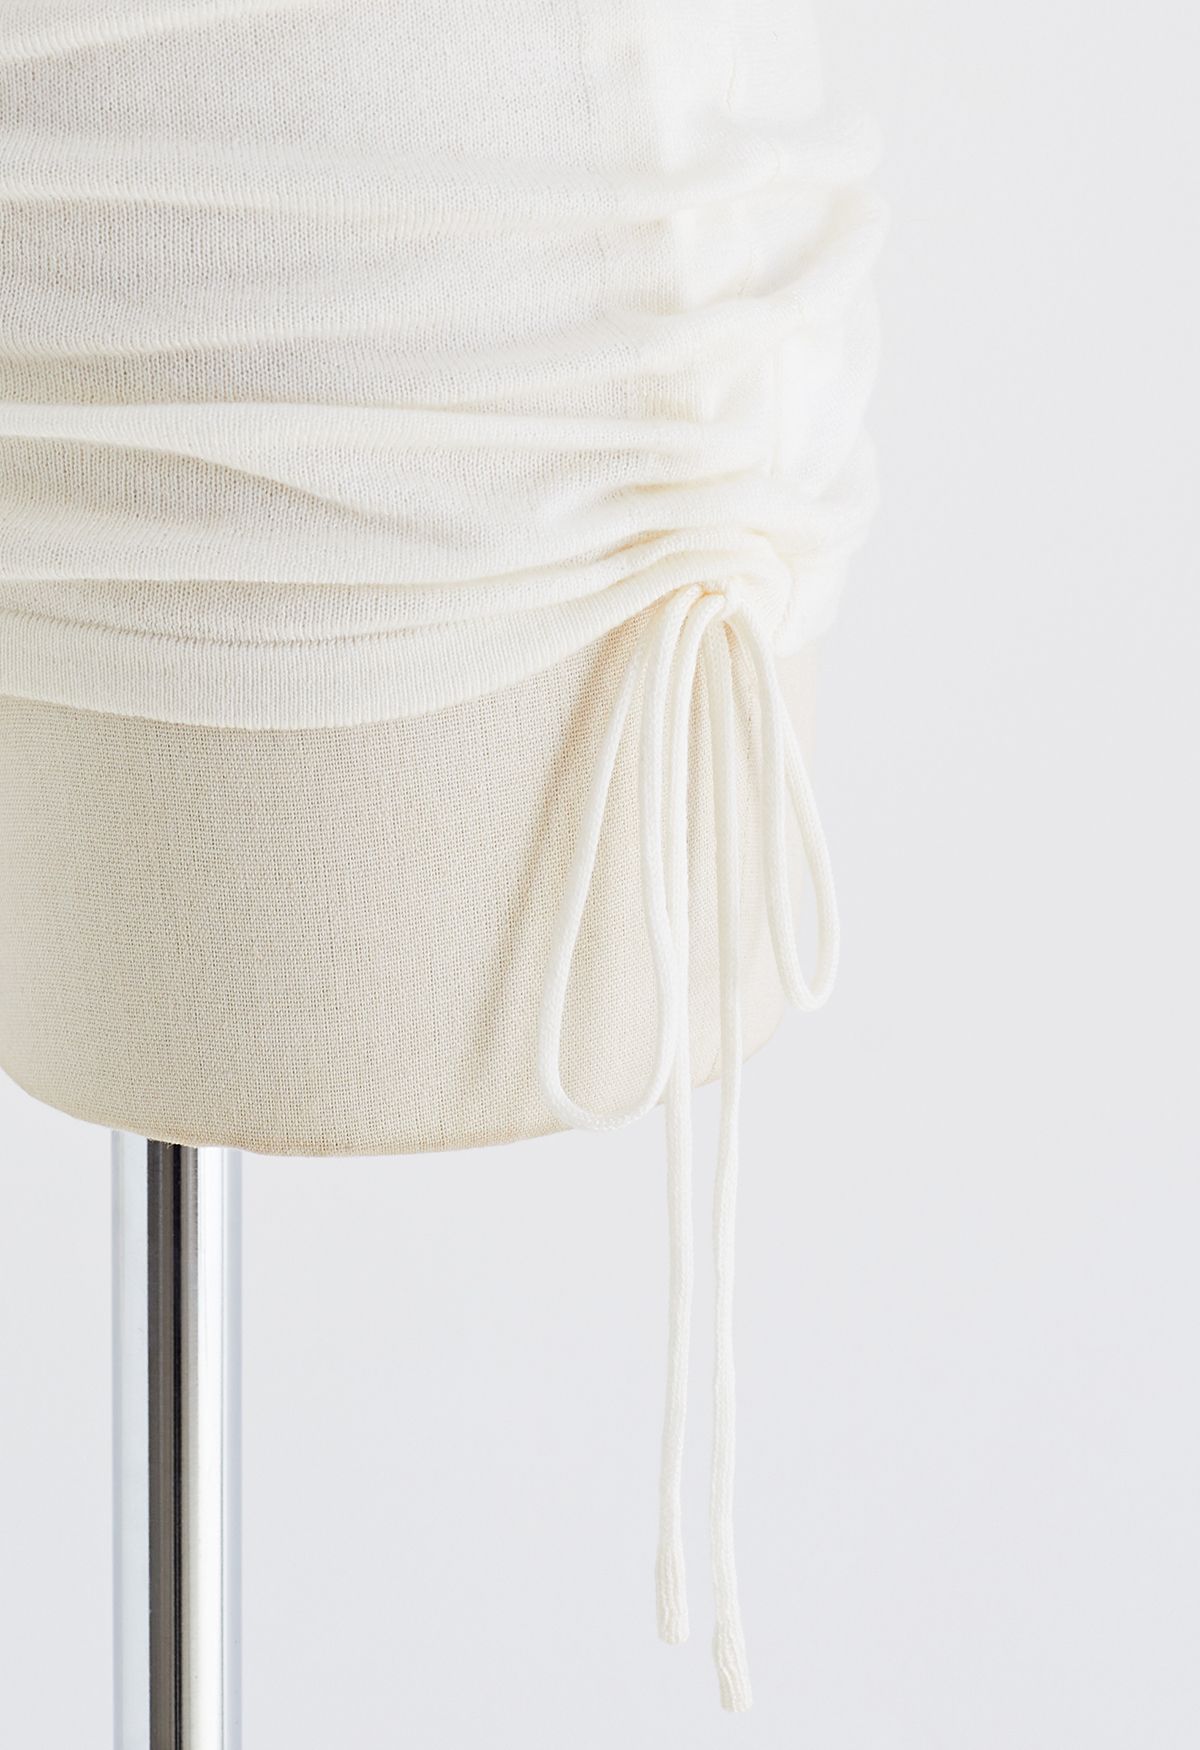 Square Neck Side Drawstring Top in Ivory